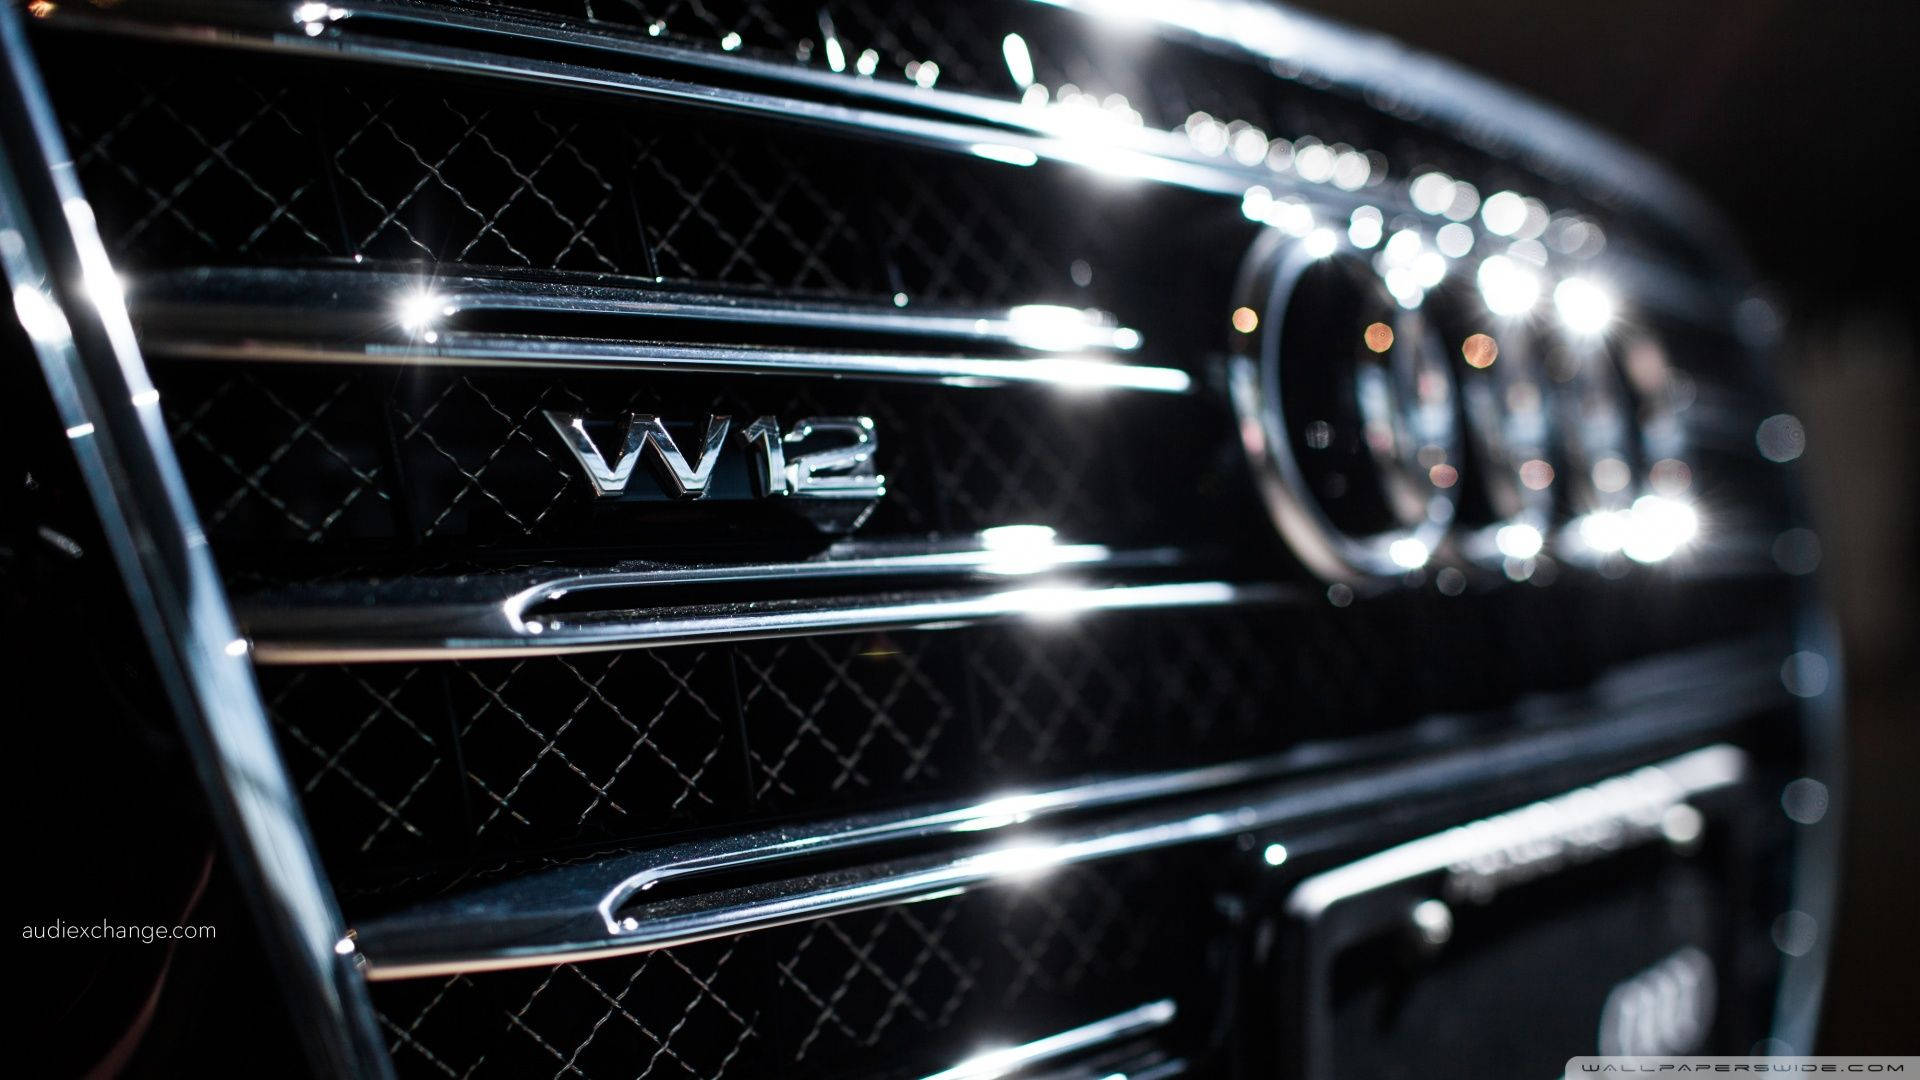 2012 Audi A8 W12 Badge And Grille Wallpaper